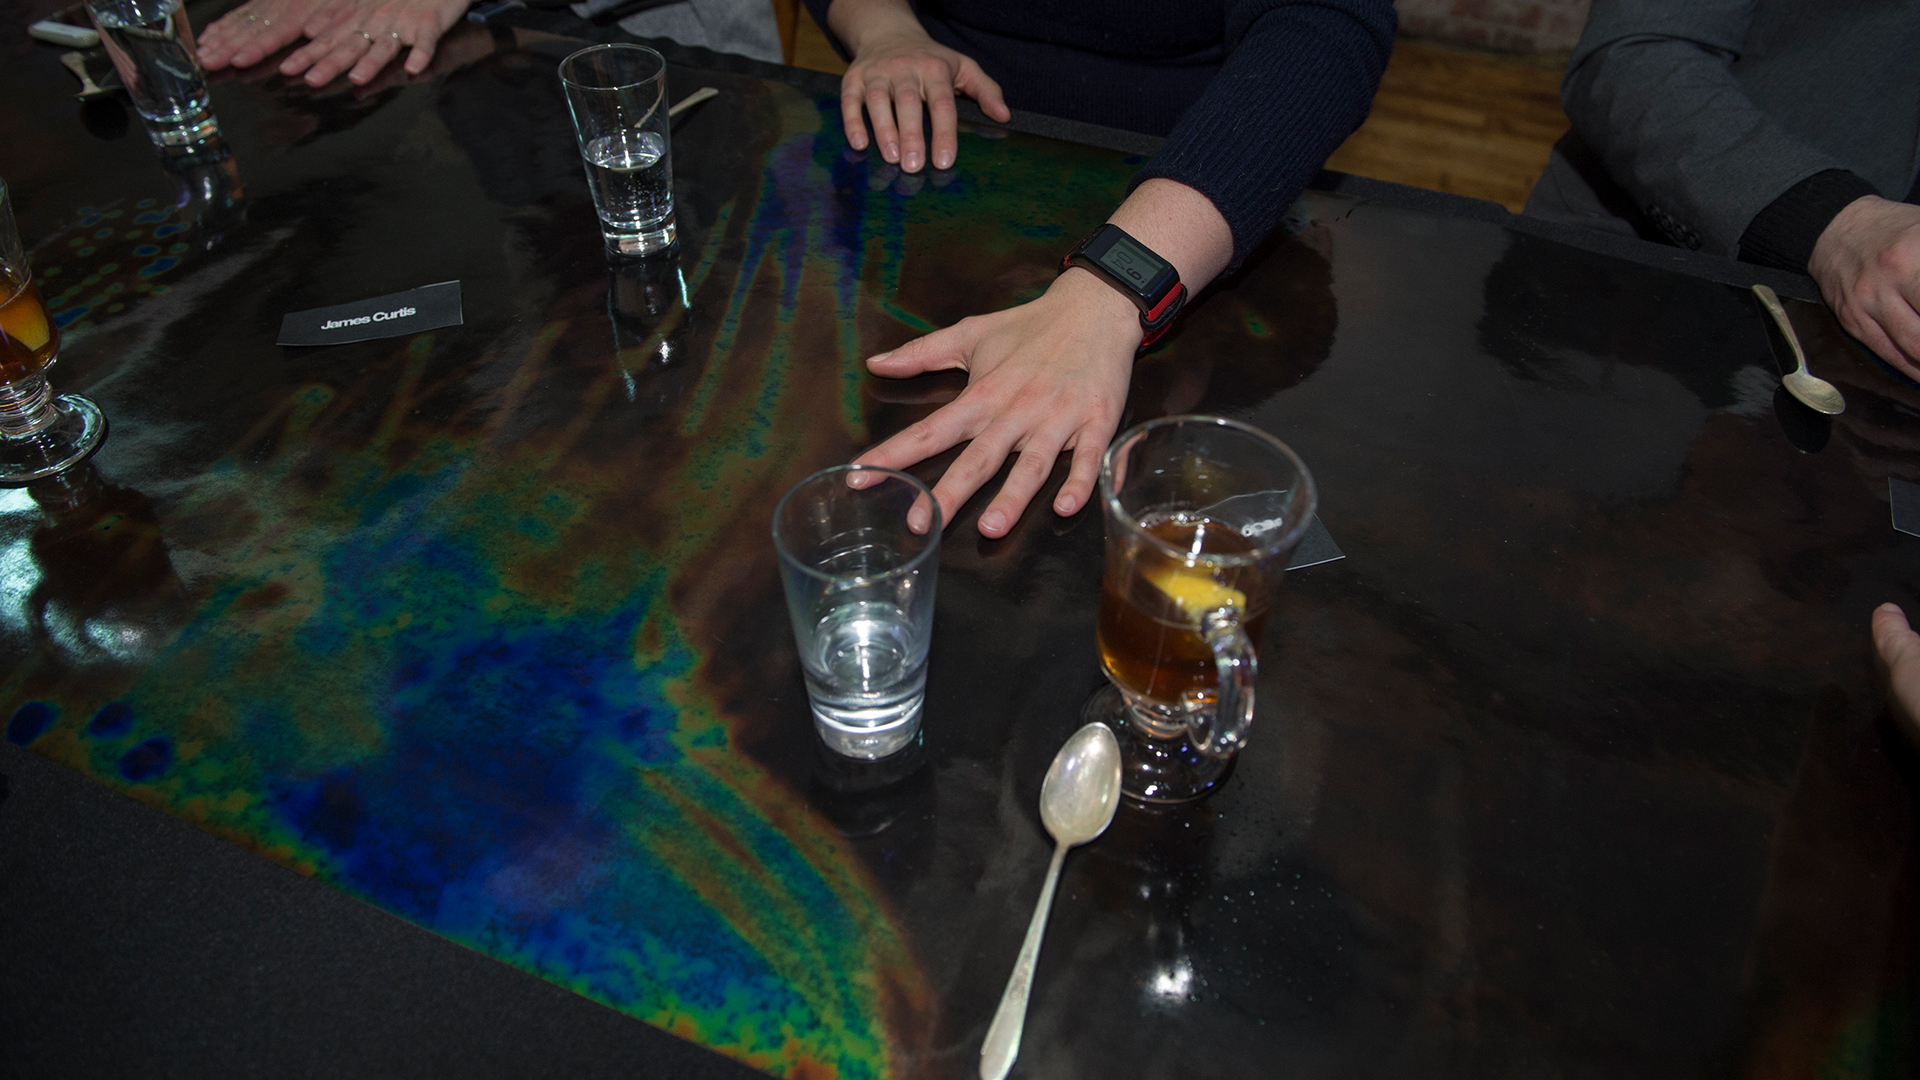 black table showing color changes from temperature changes from drinks and heat from hands